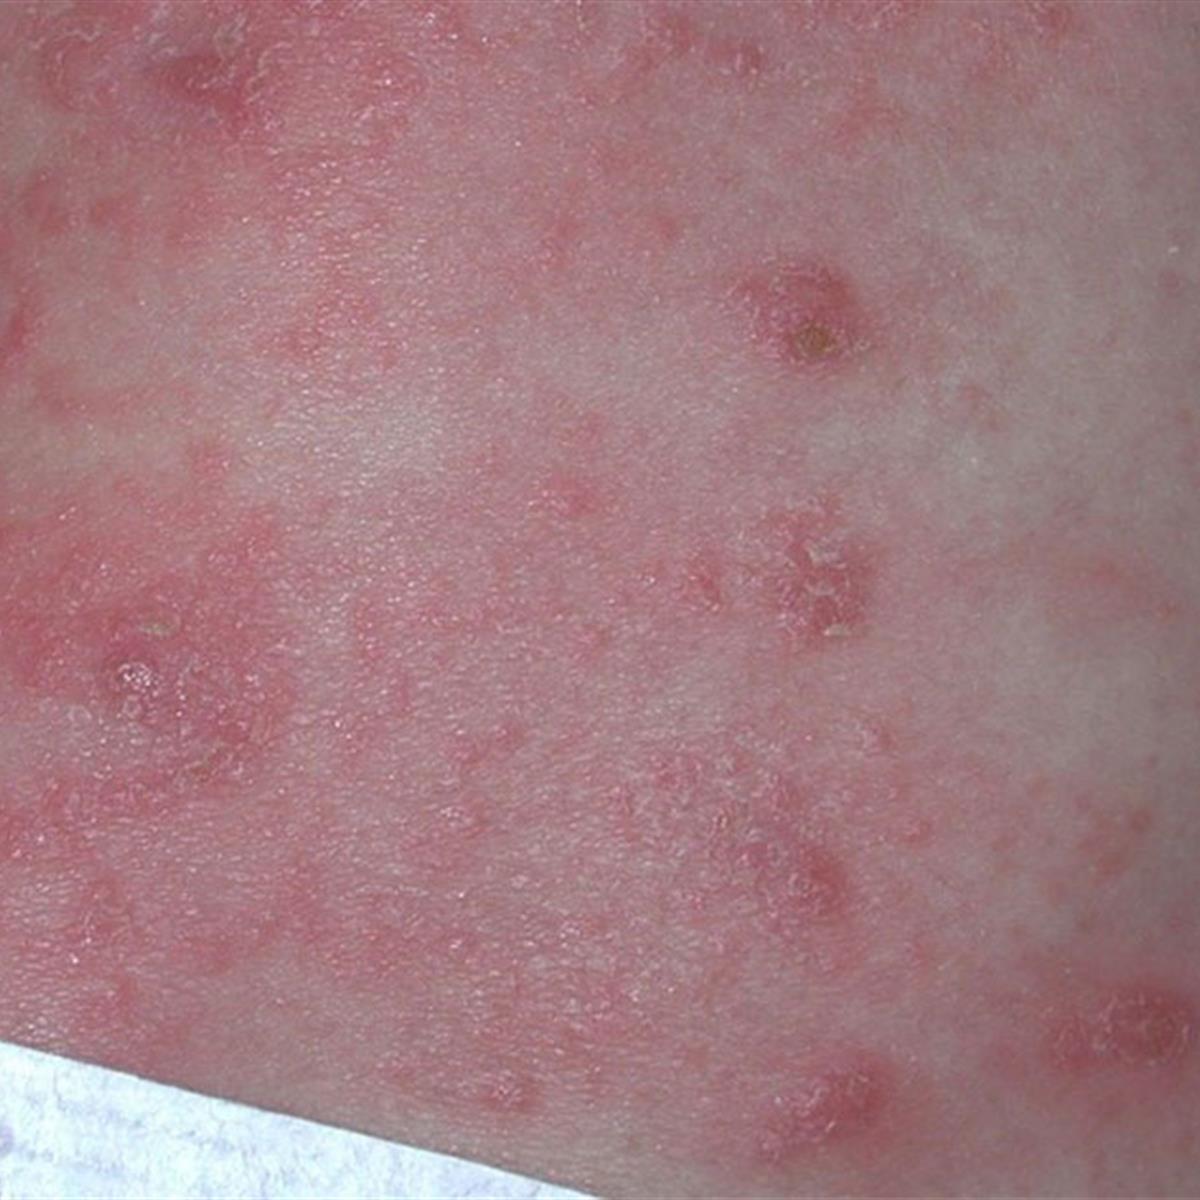 Scabies In Kids: Causes, Symptoms, Diagnosis And Treatment